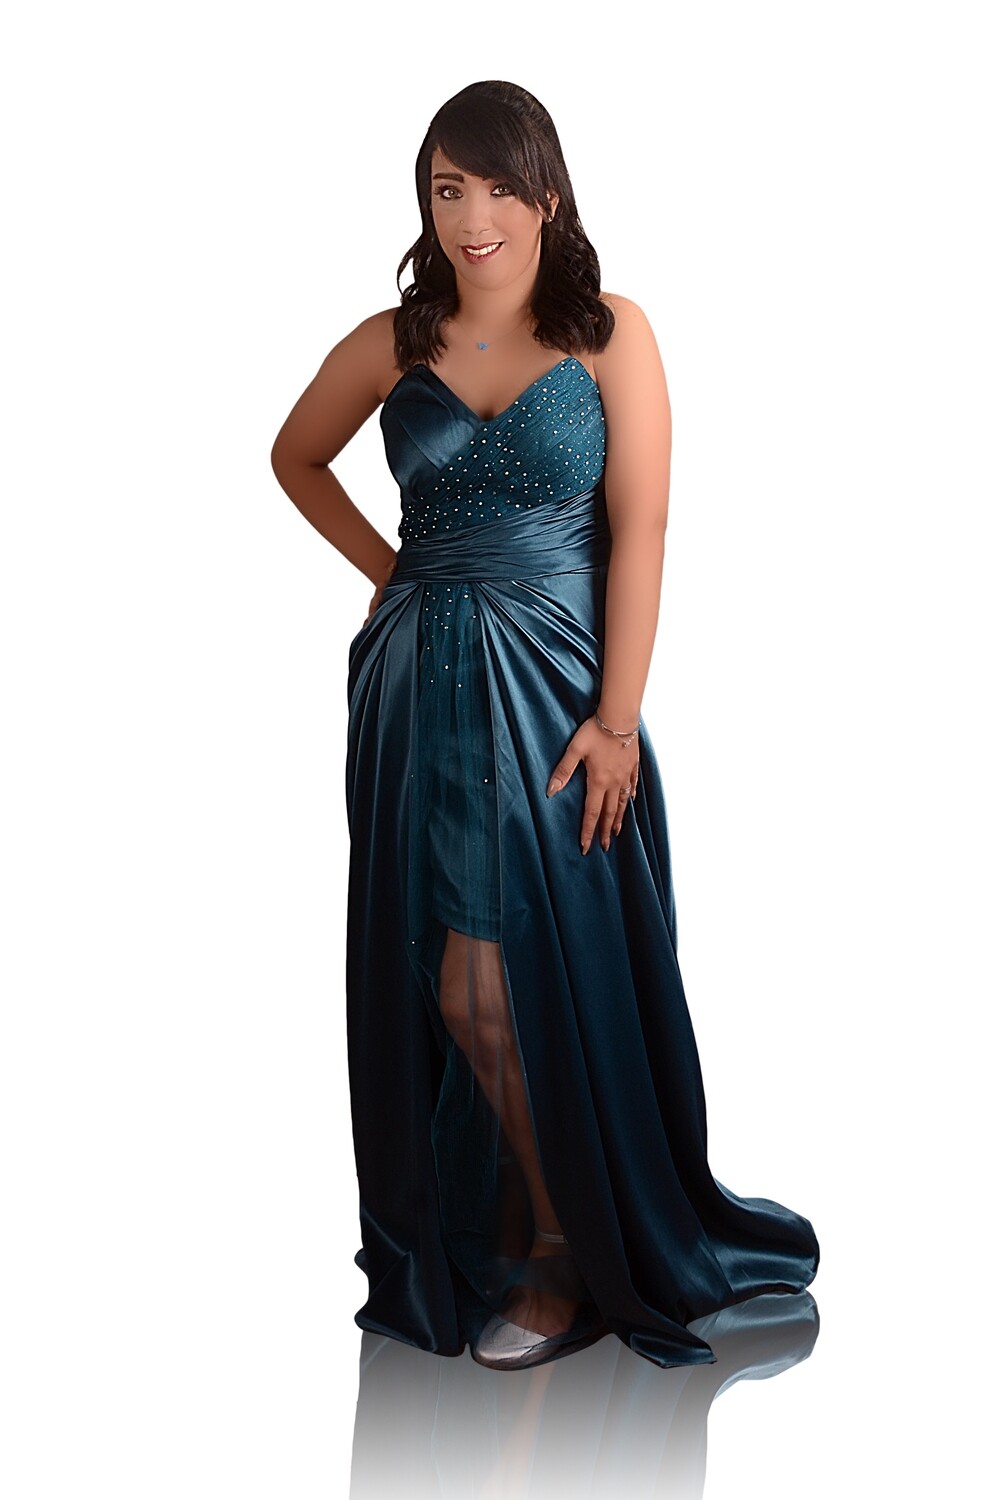 Strapless Short Soiree Dress With Overskirt And Beaded Details - Turquoise 8657